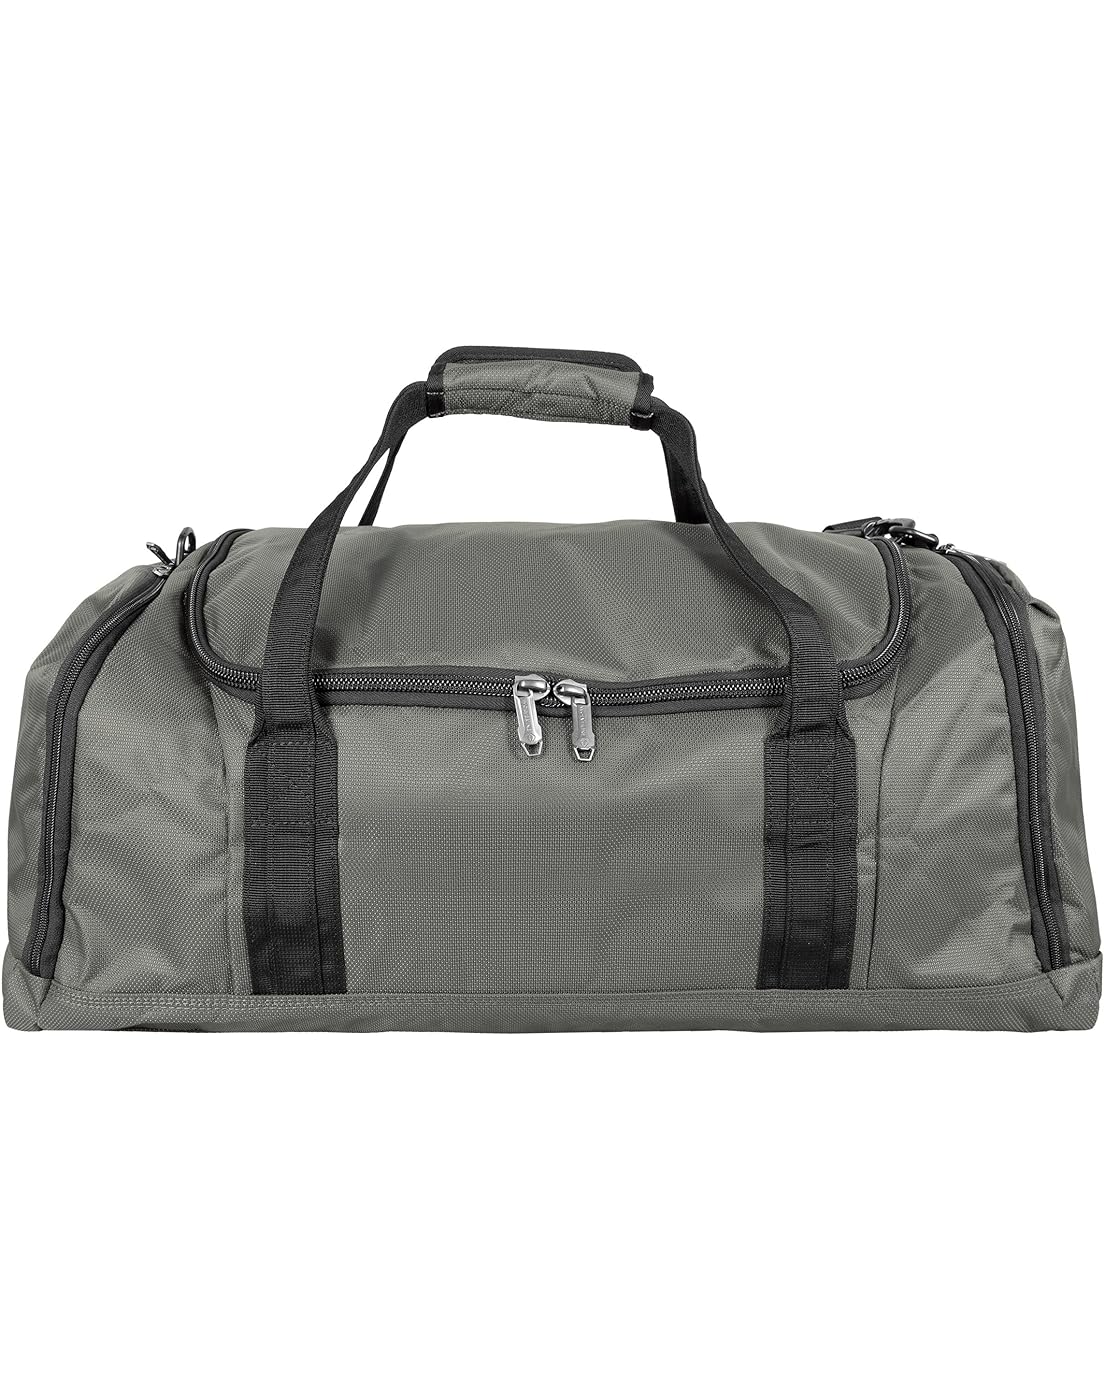  Wolverine 26 Duffel with boot compartment